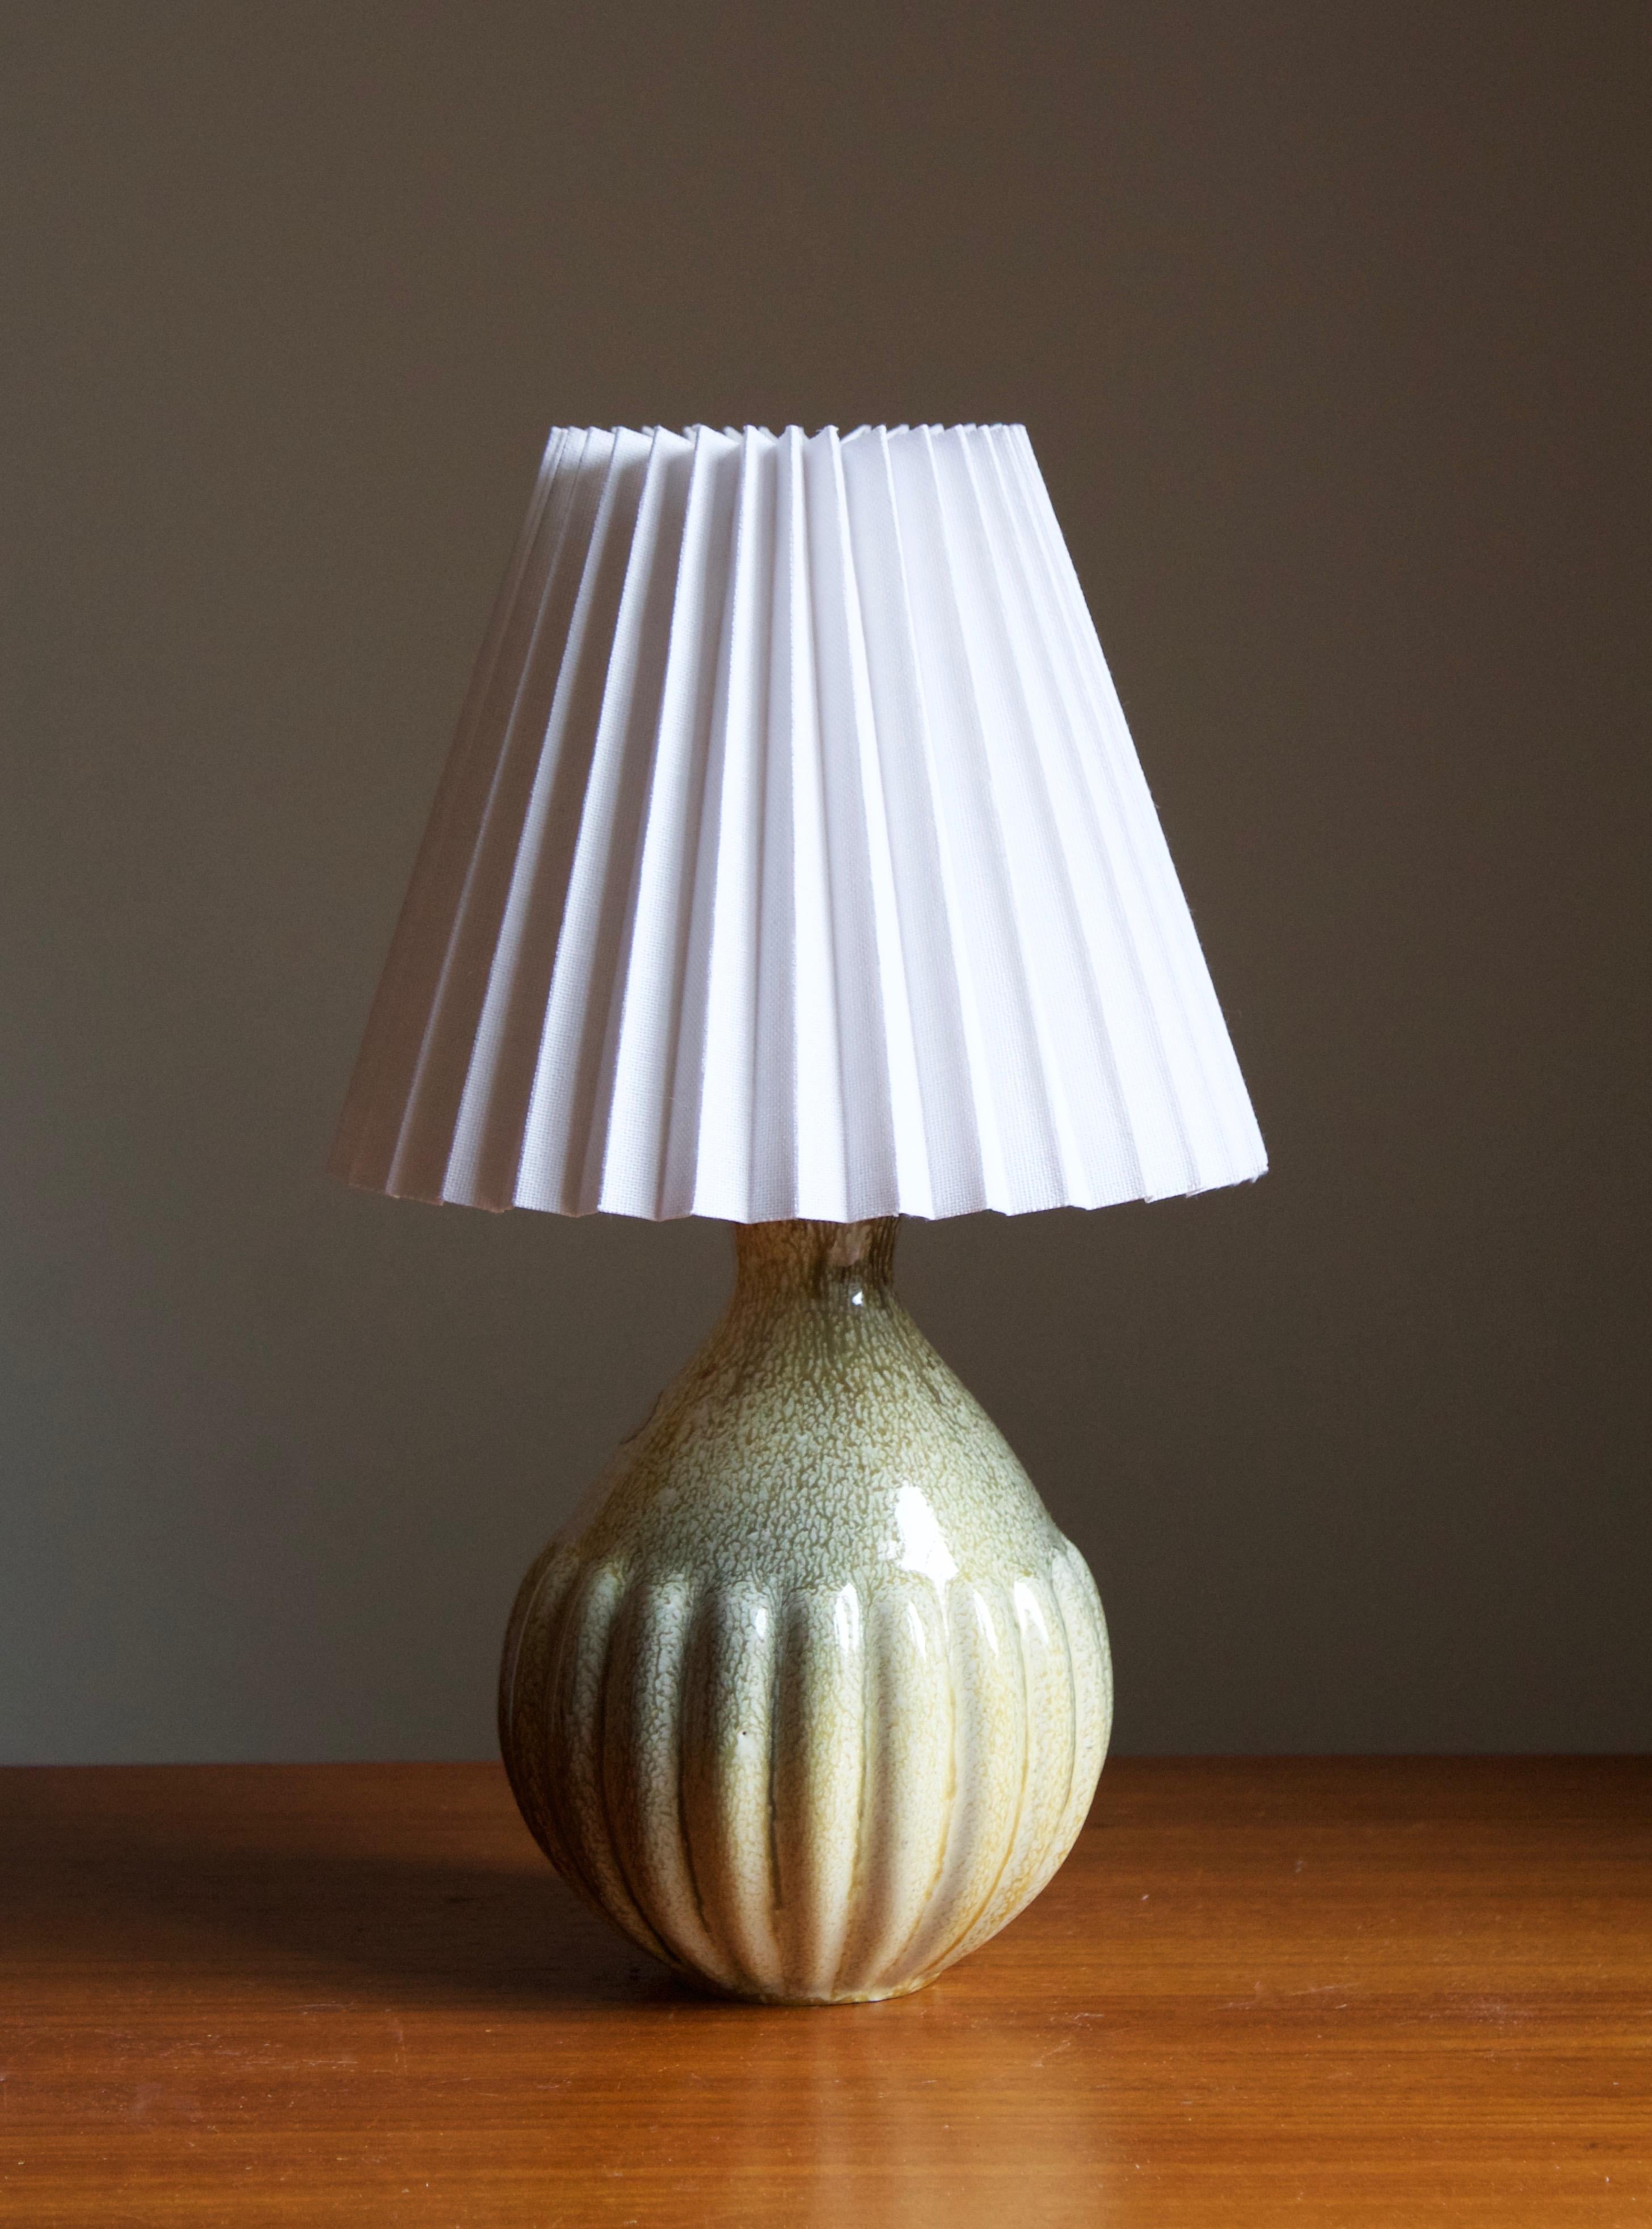 An early modernist table lamp. Produced by Upsala-Ekeby, Sweden, 1930s. Makers label.

Stated dimensions exclude lampshade. Height includes socket. The lampshade can be included in purchase upon request.

Glaze features brown-green colors.

Other